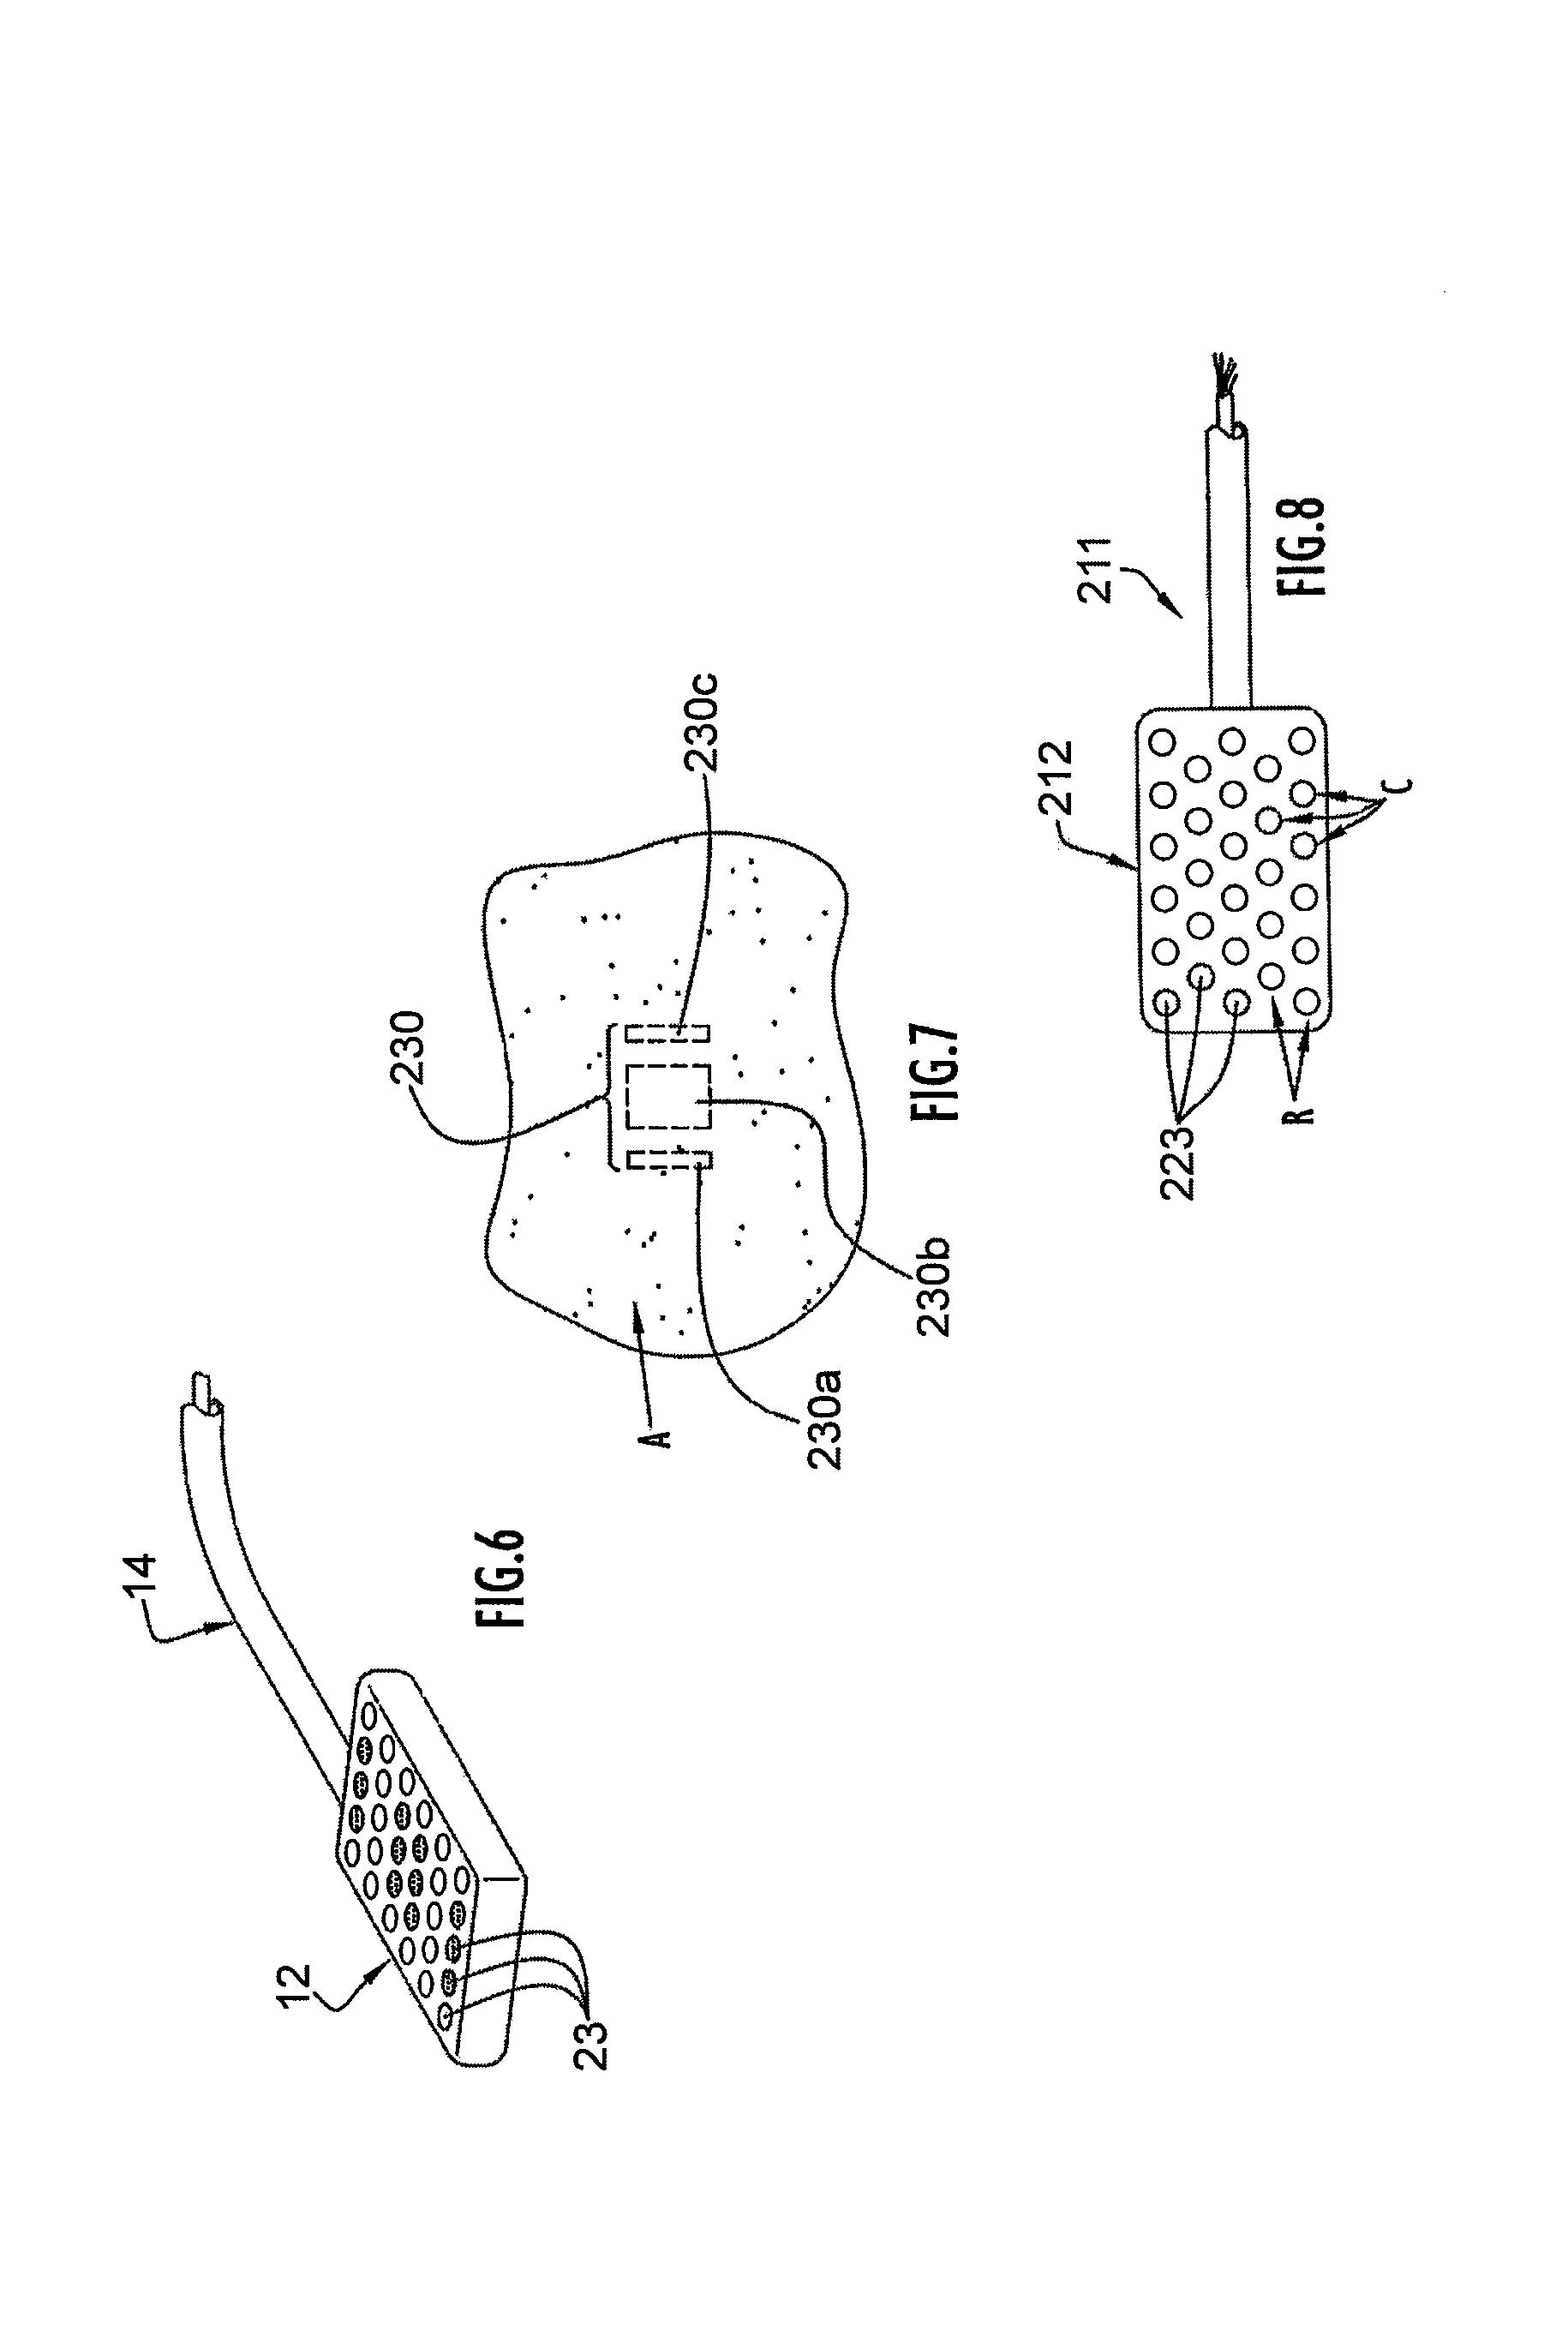 Focused ultrasound ablation devices having selectively actuatable emitting elements and methods of using the same